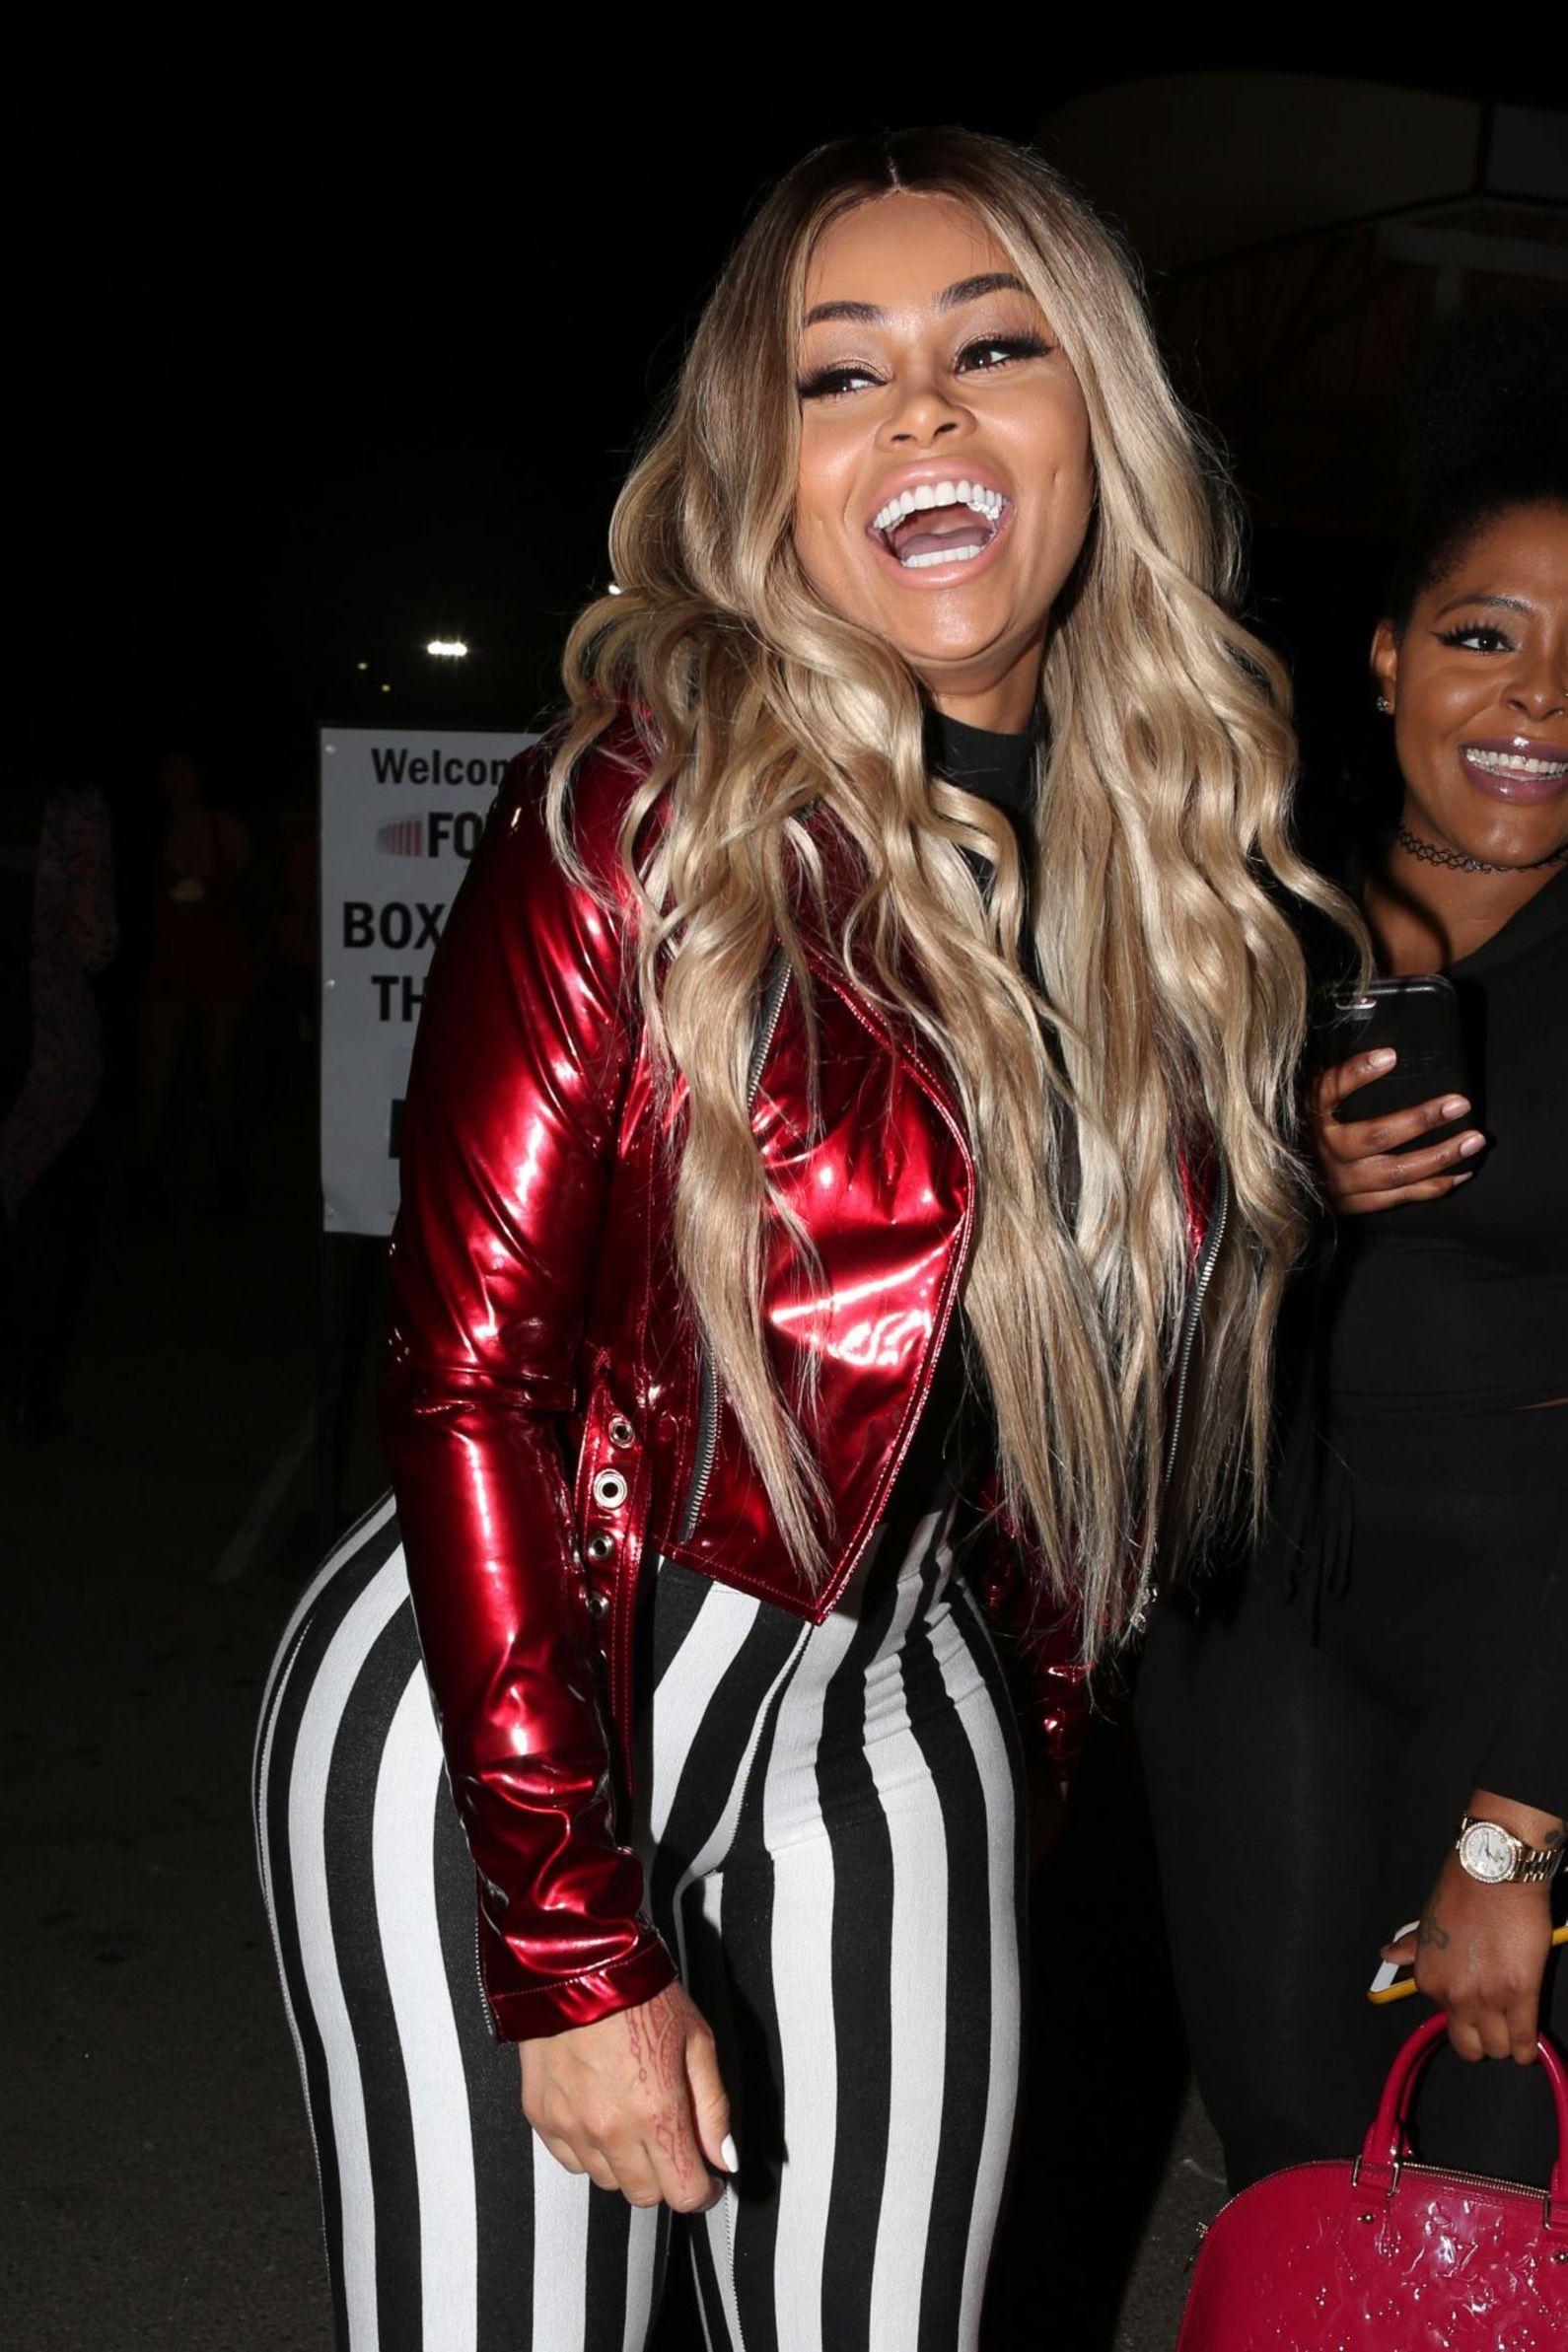 Blac Chyna Arrives At The Rihannas Concert In Inglewood 10